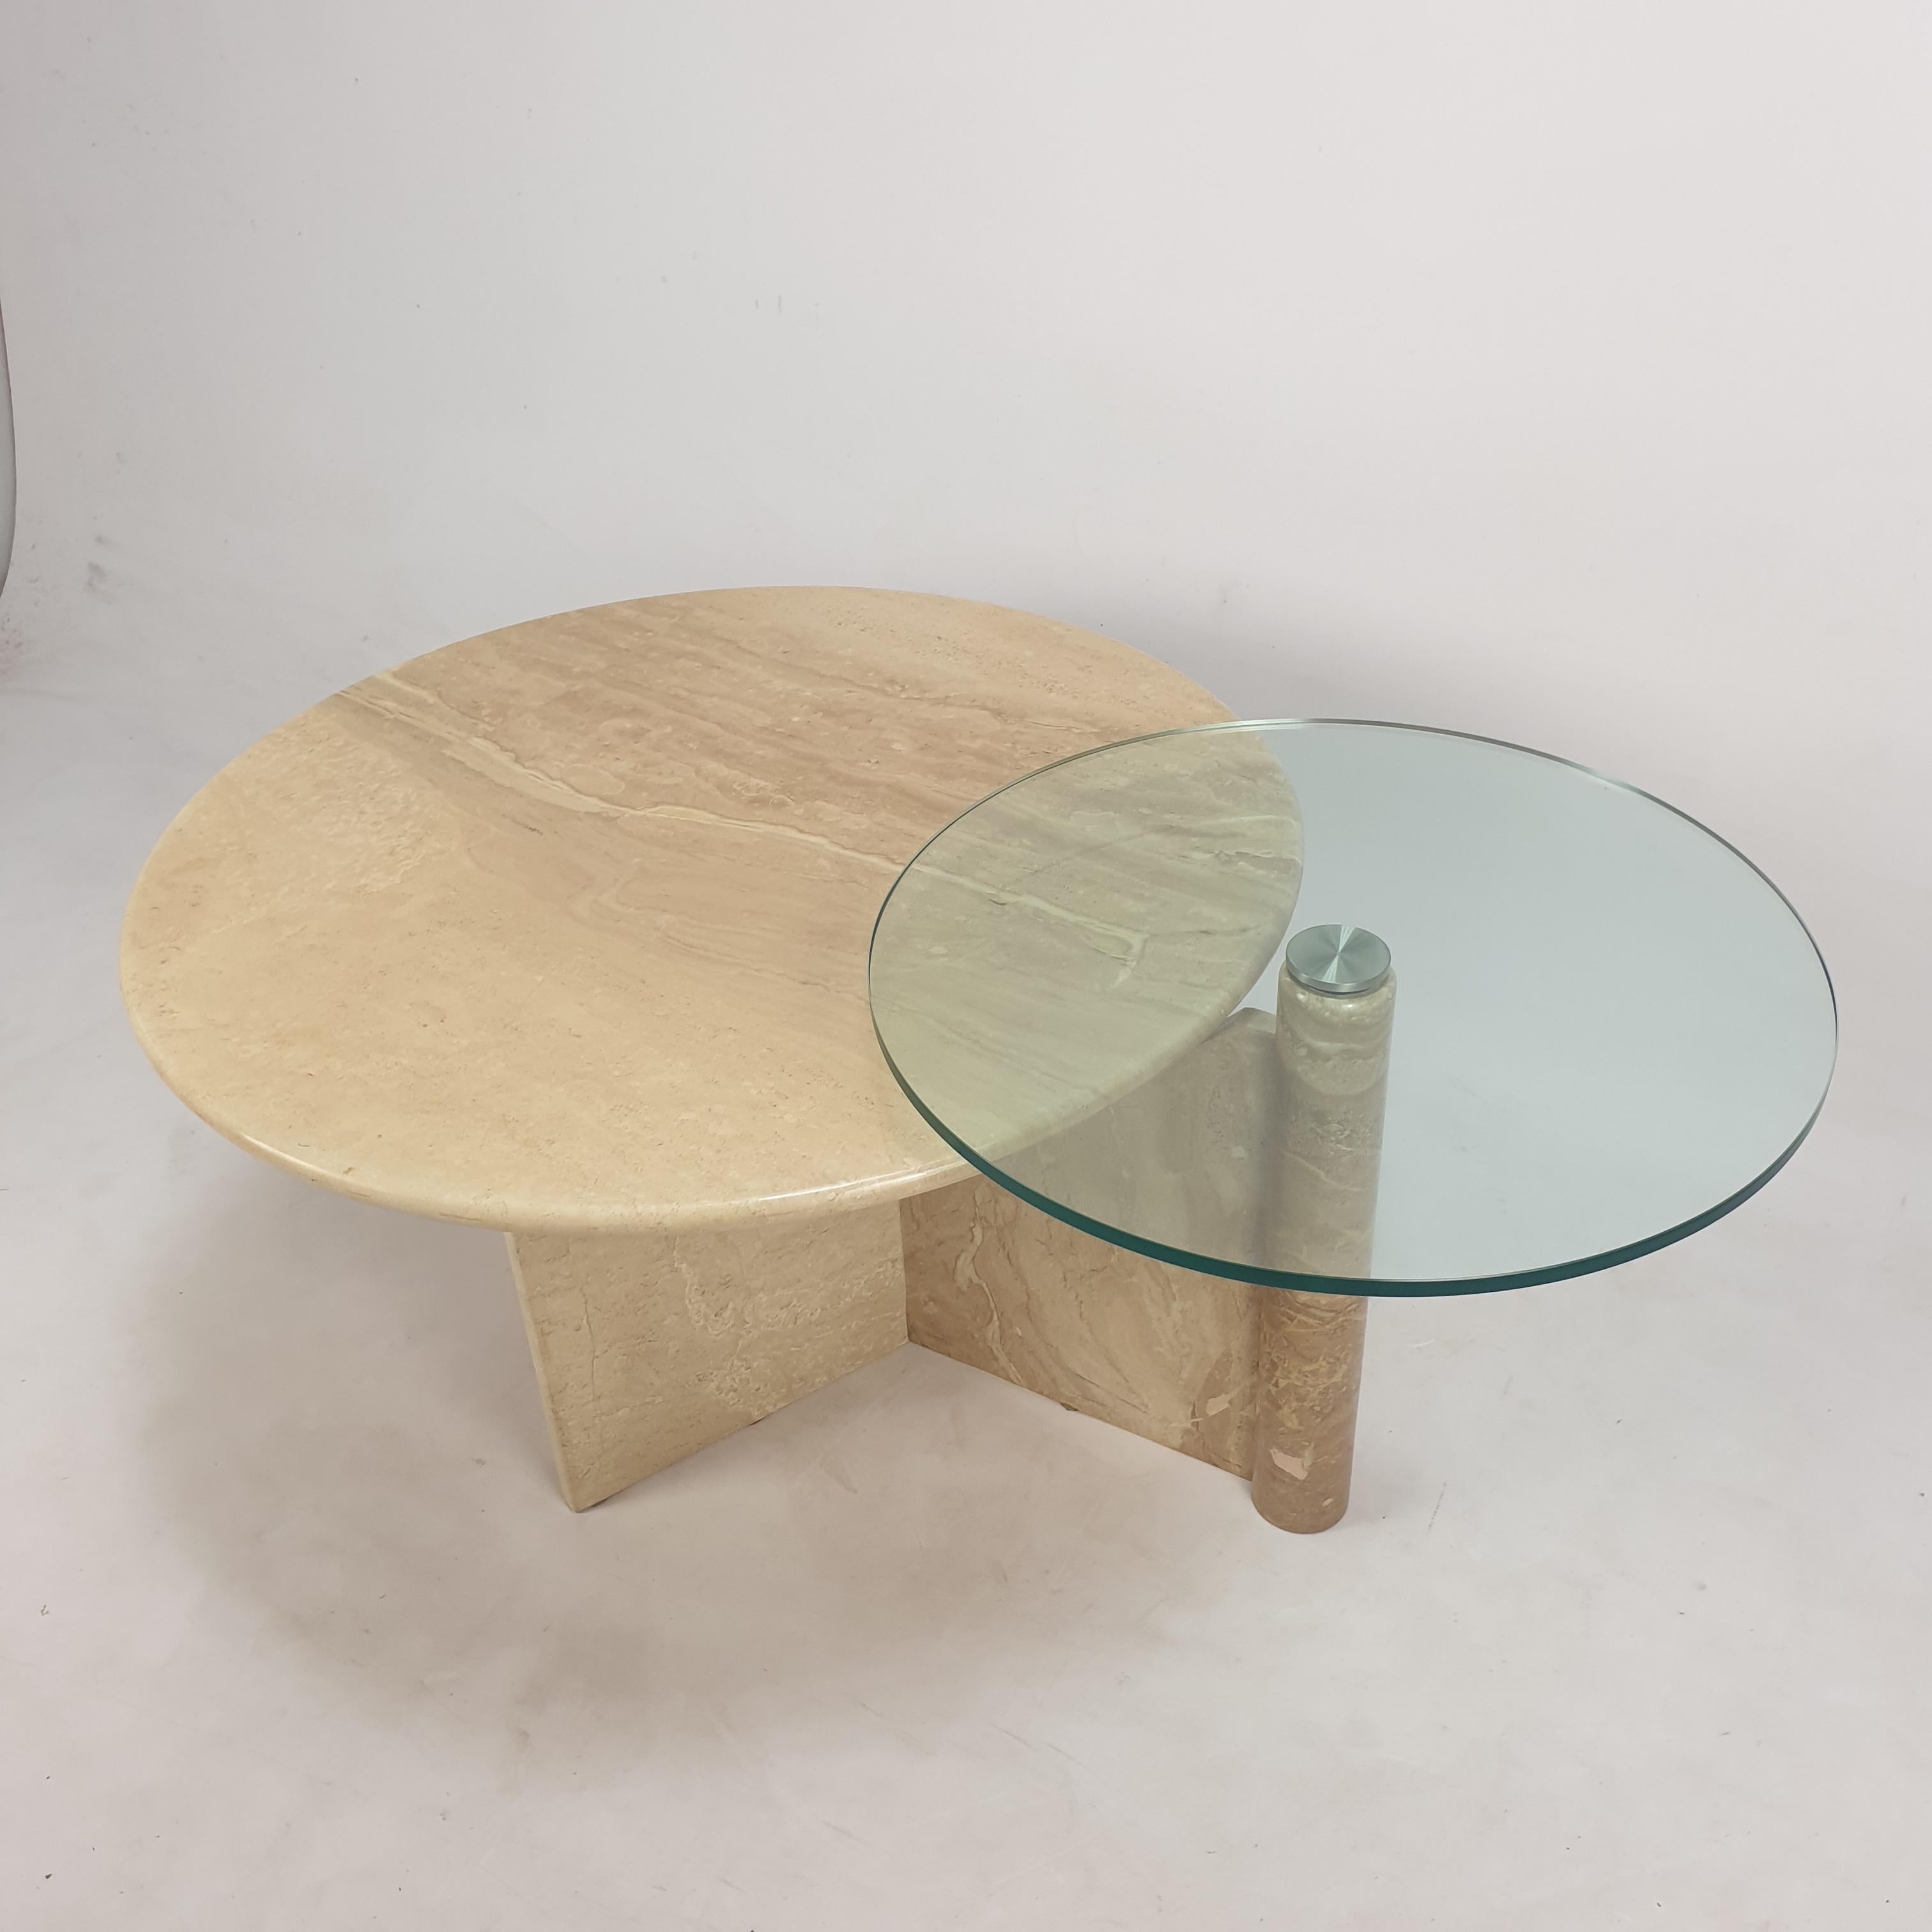 Italian Travertine and Glass Coffee Table, 1980s For Sale 7